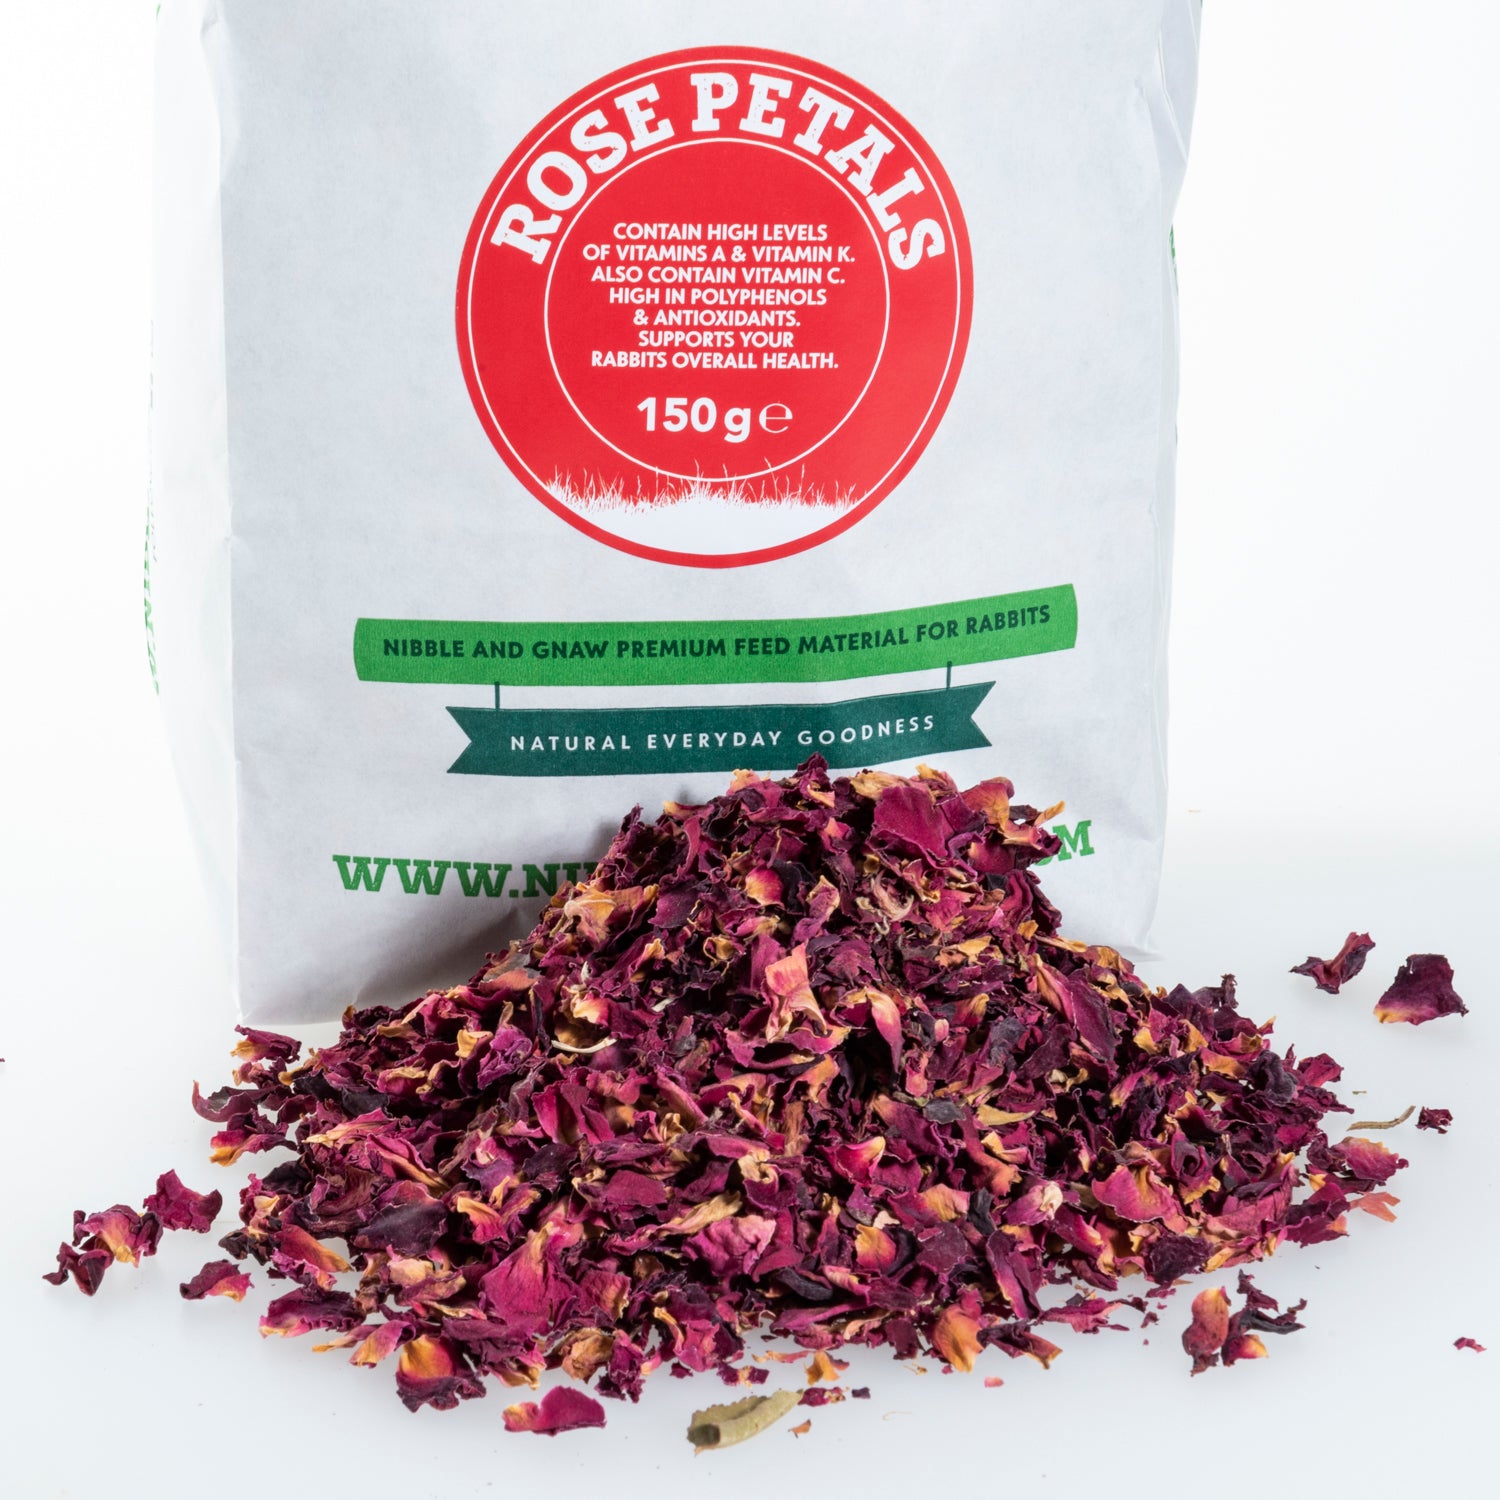 Rose Petals for Rabbits, Guinea Pigs and Small Animals